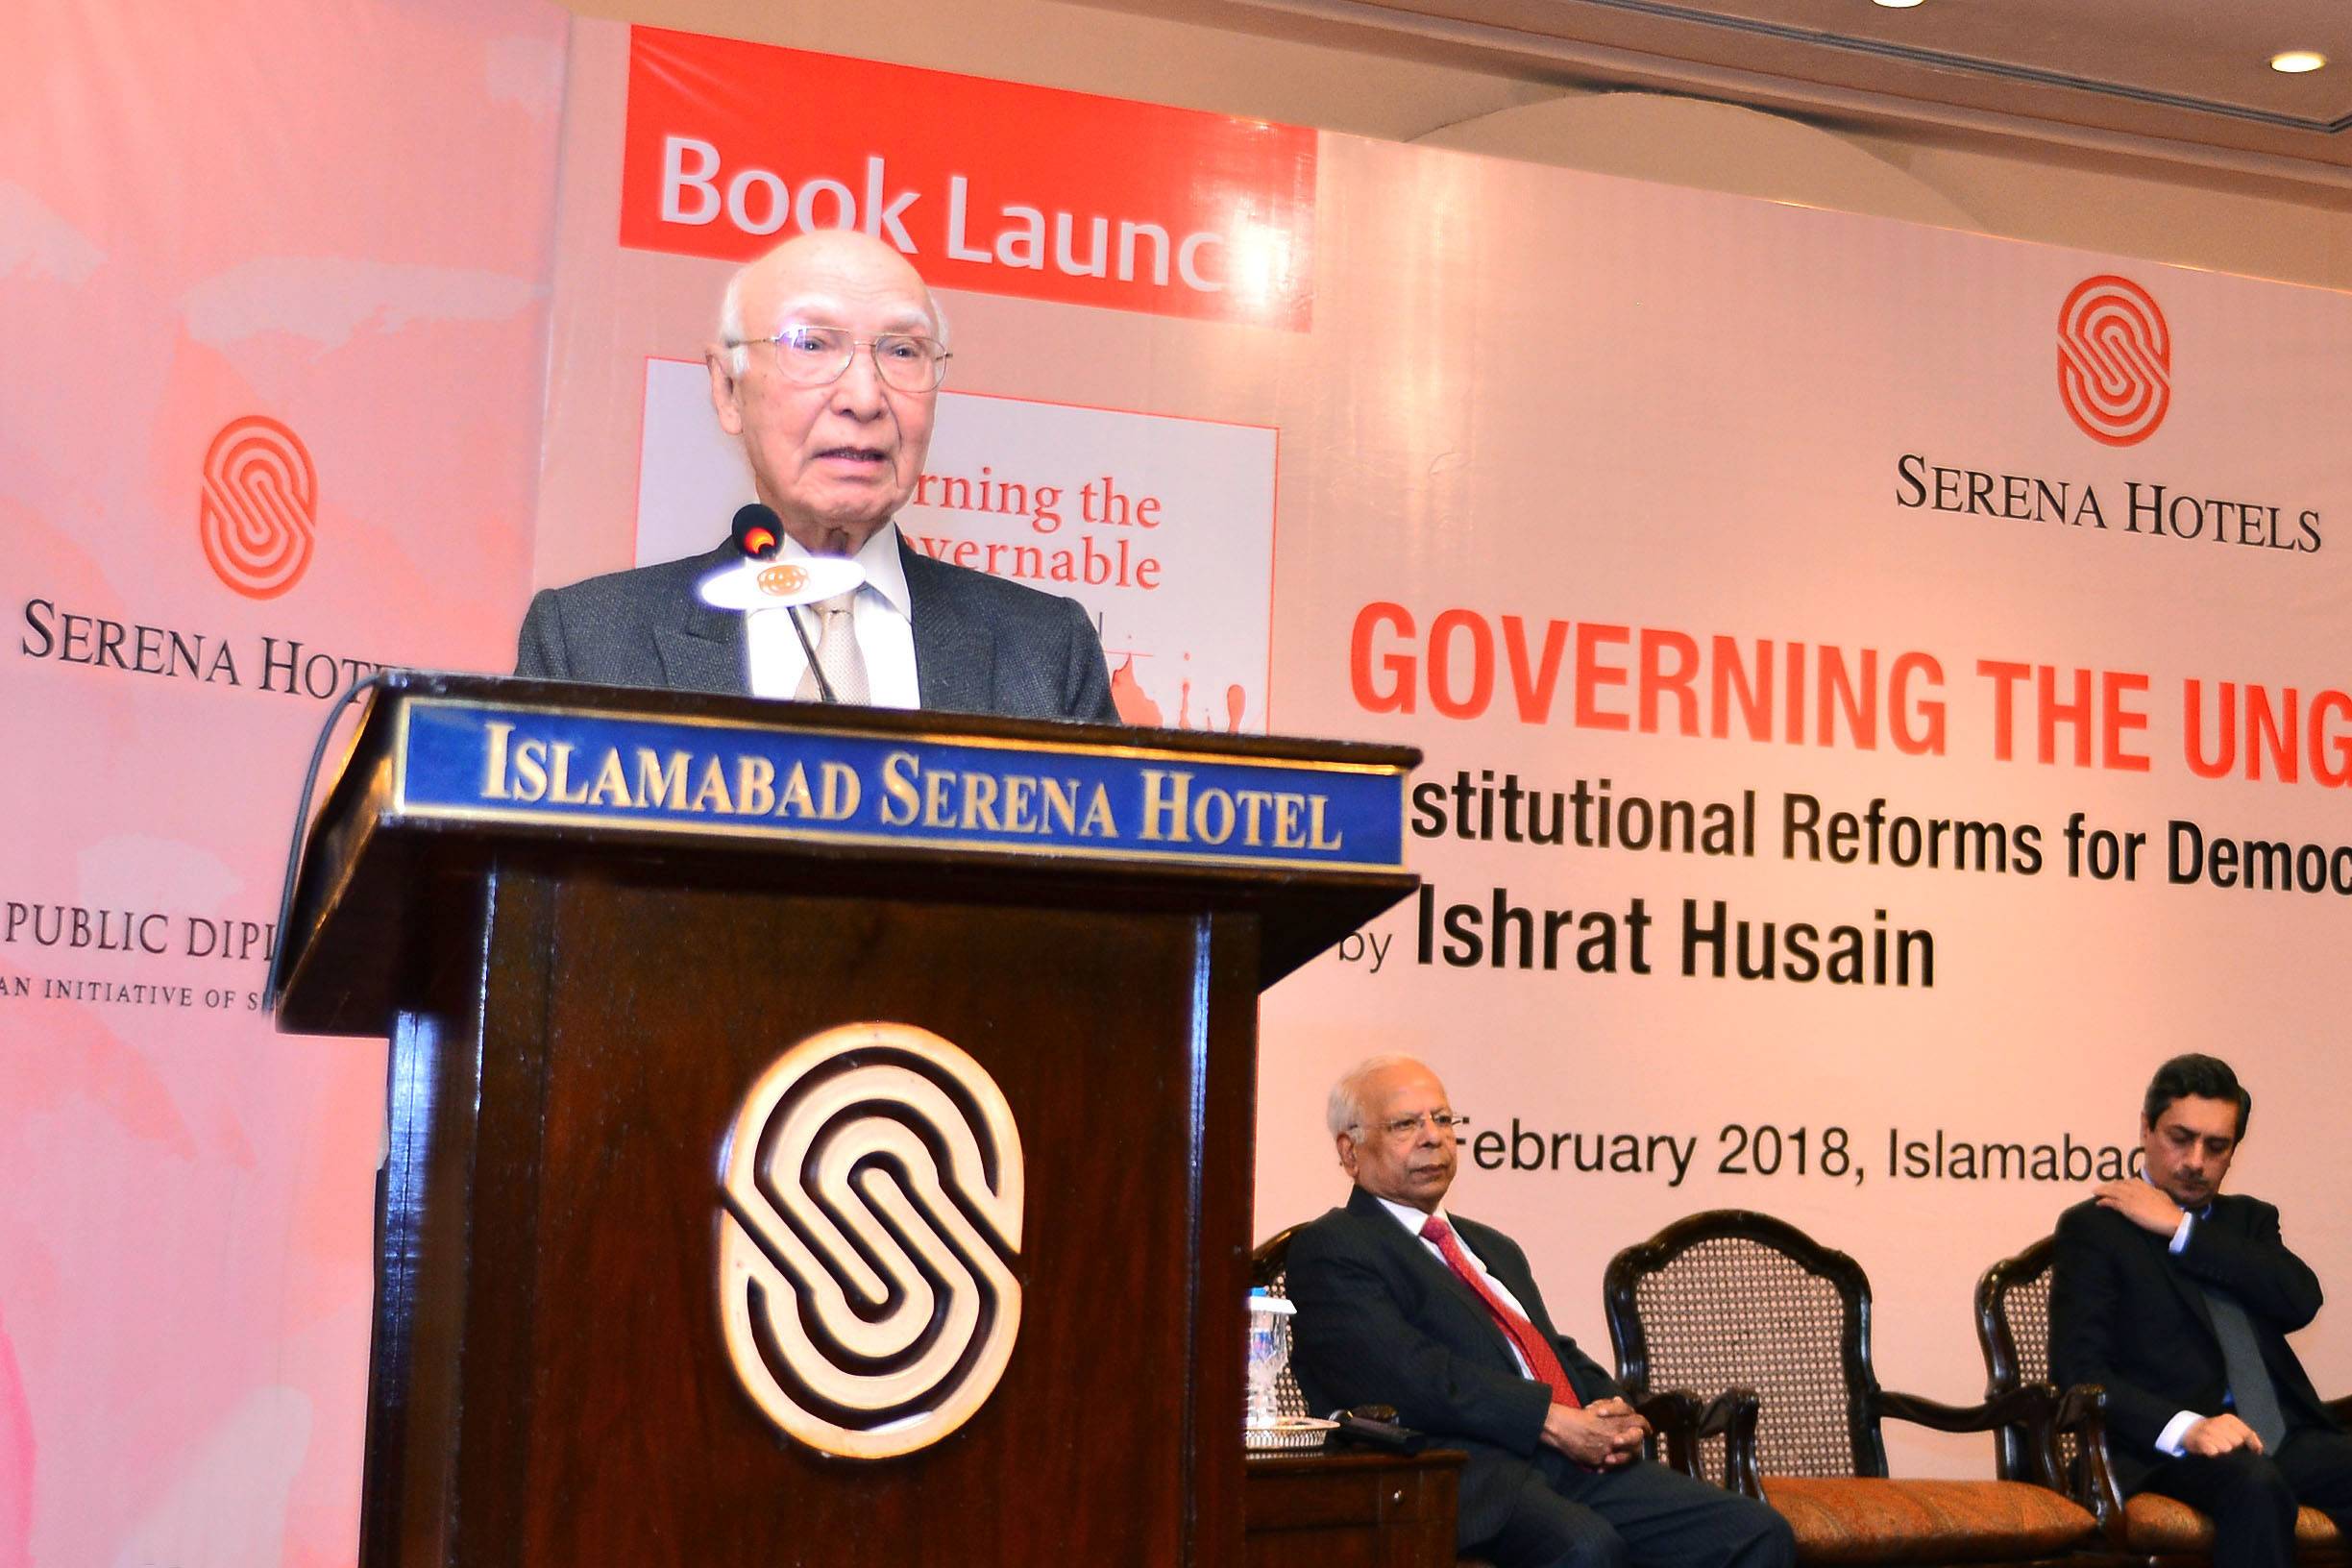 Ishrat Husain launches ‘Governing the Ungovernable’ at Serena Hotels